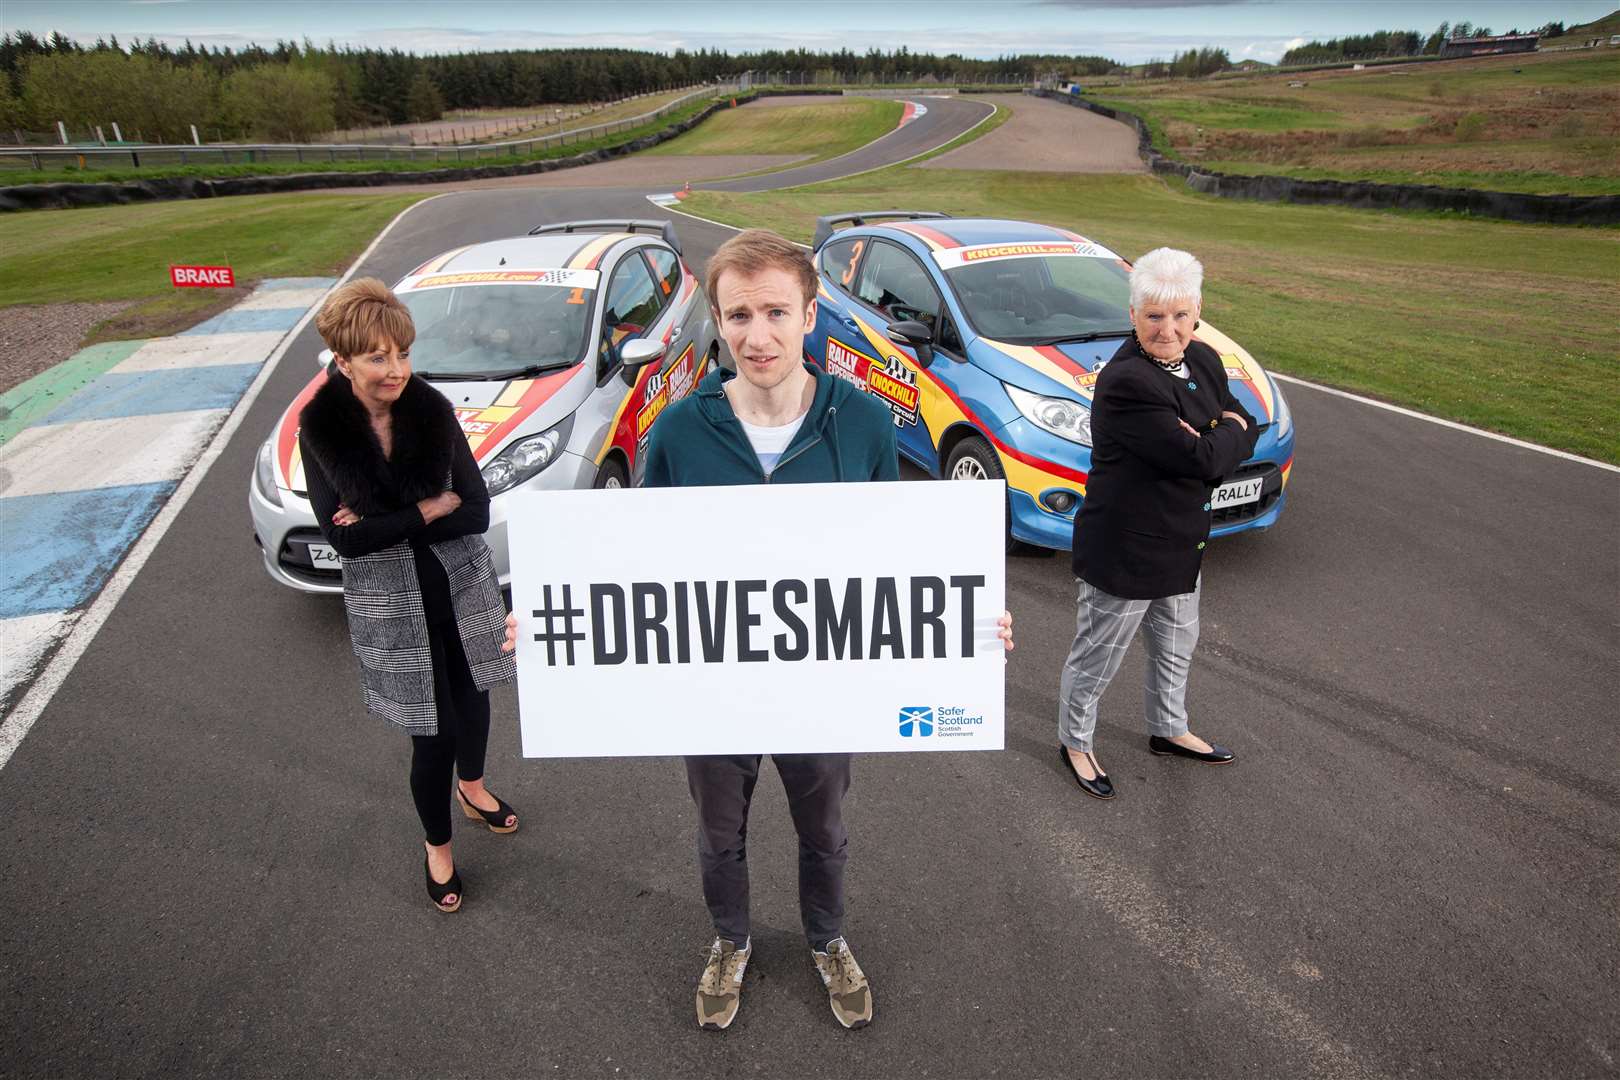 The ‘Gran Kart’ experience is part of the Scottish Government and Road Safety Scotland #DriveSmart campaign.